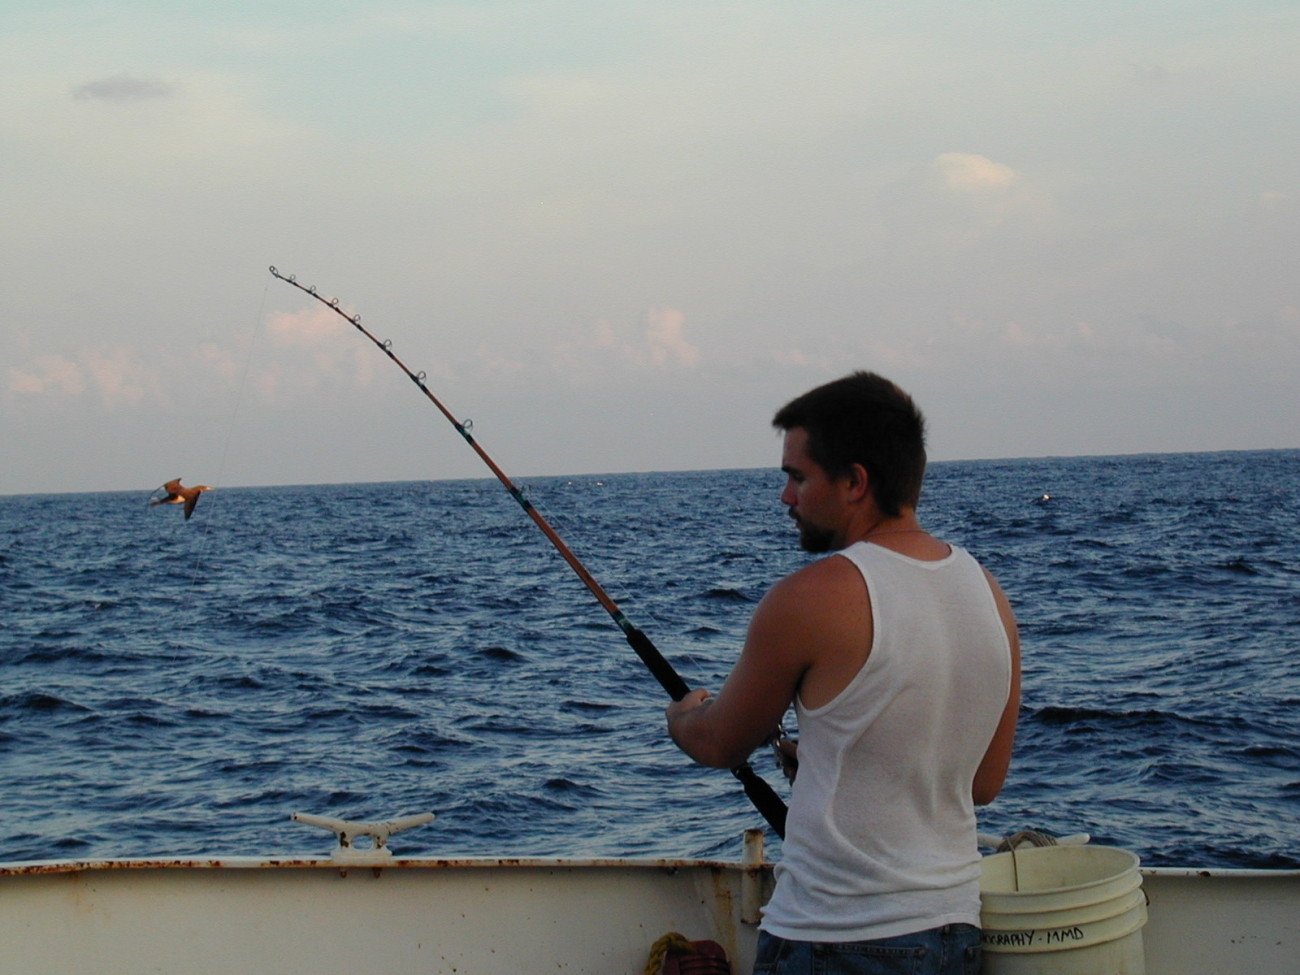 McARTHUR deck hand Michael Theberge fishing during free time in theEastern Tropical Pacific